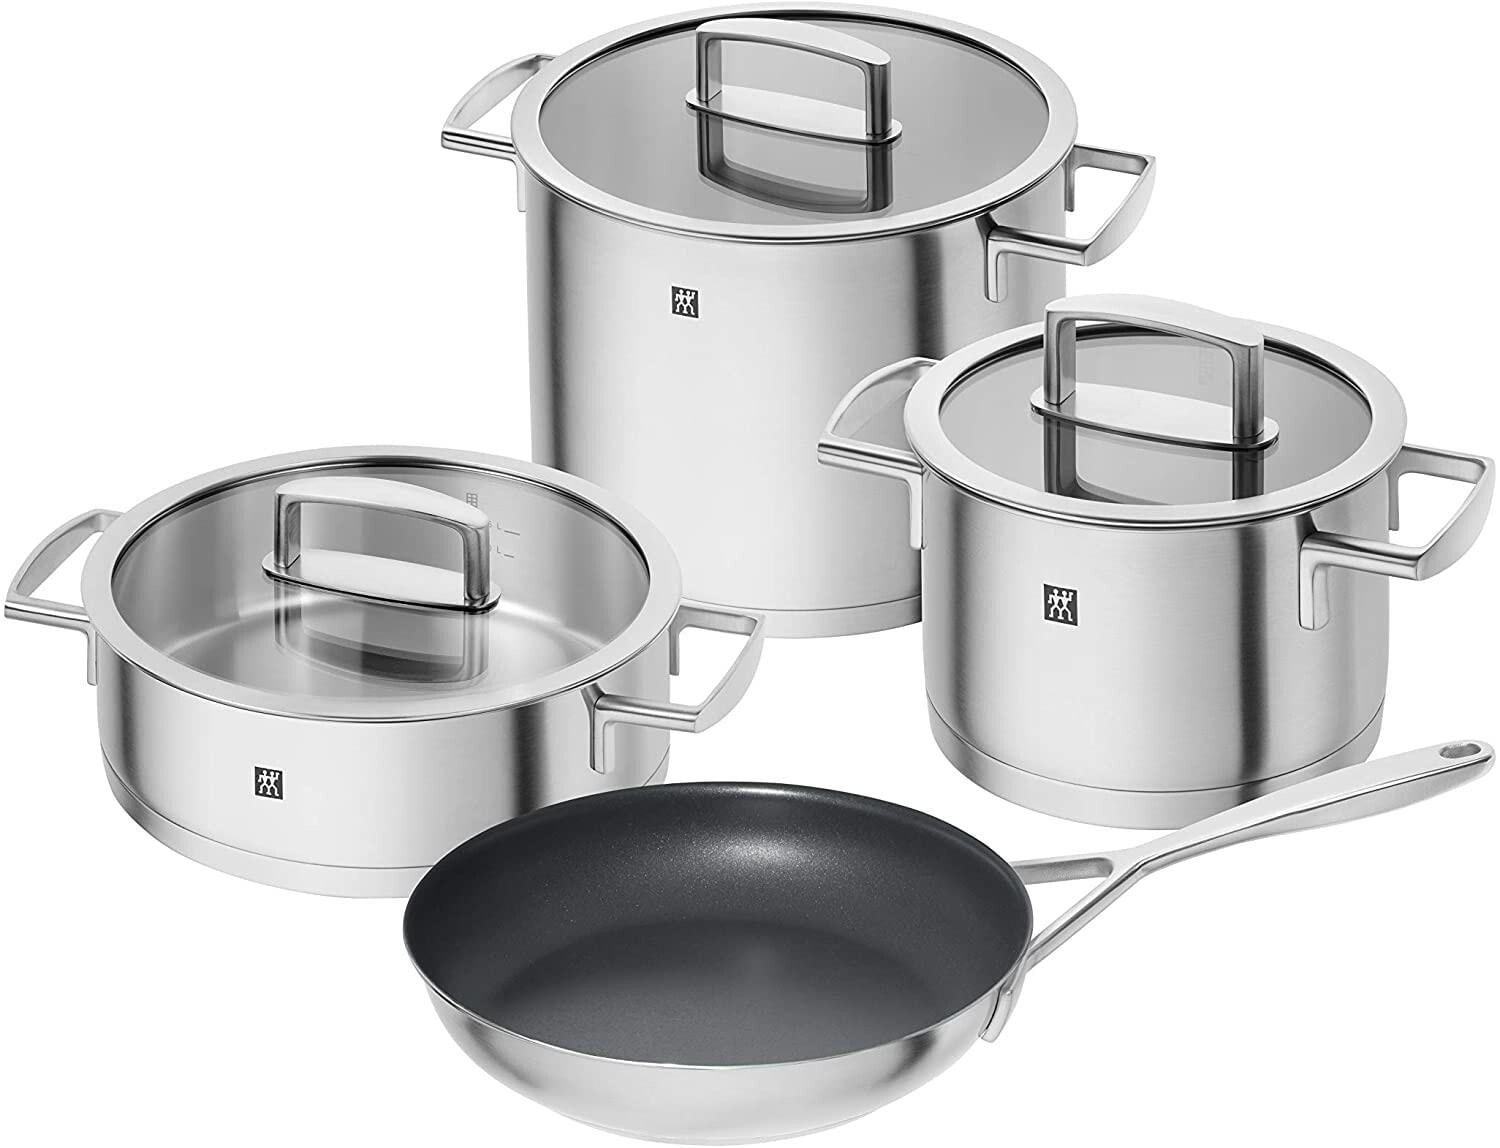 Zwilling 3-Piece Cookware Set with Pots and Pan, Induction Compatible, Stainless Steel, Vitality